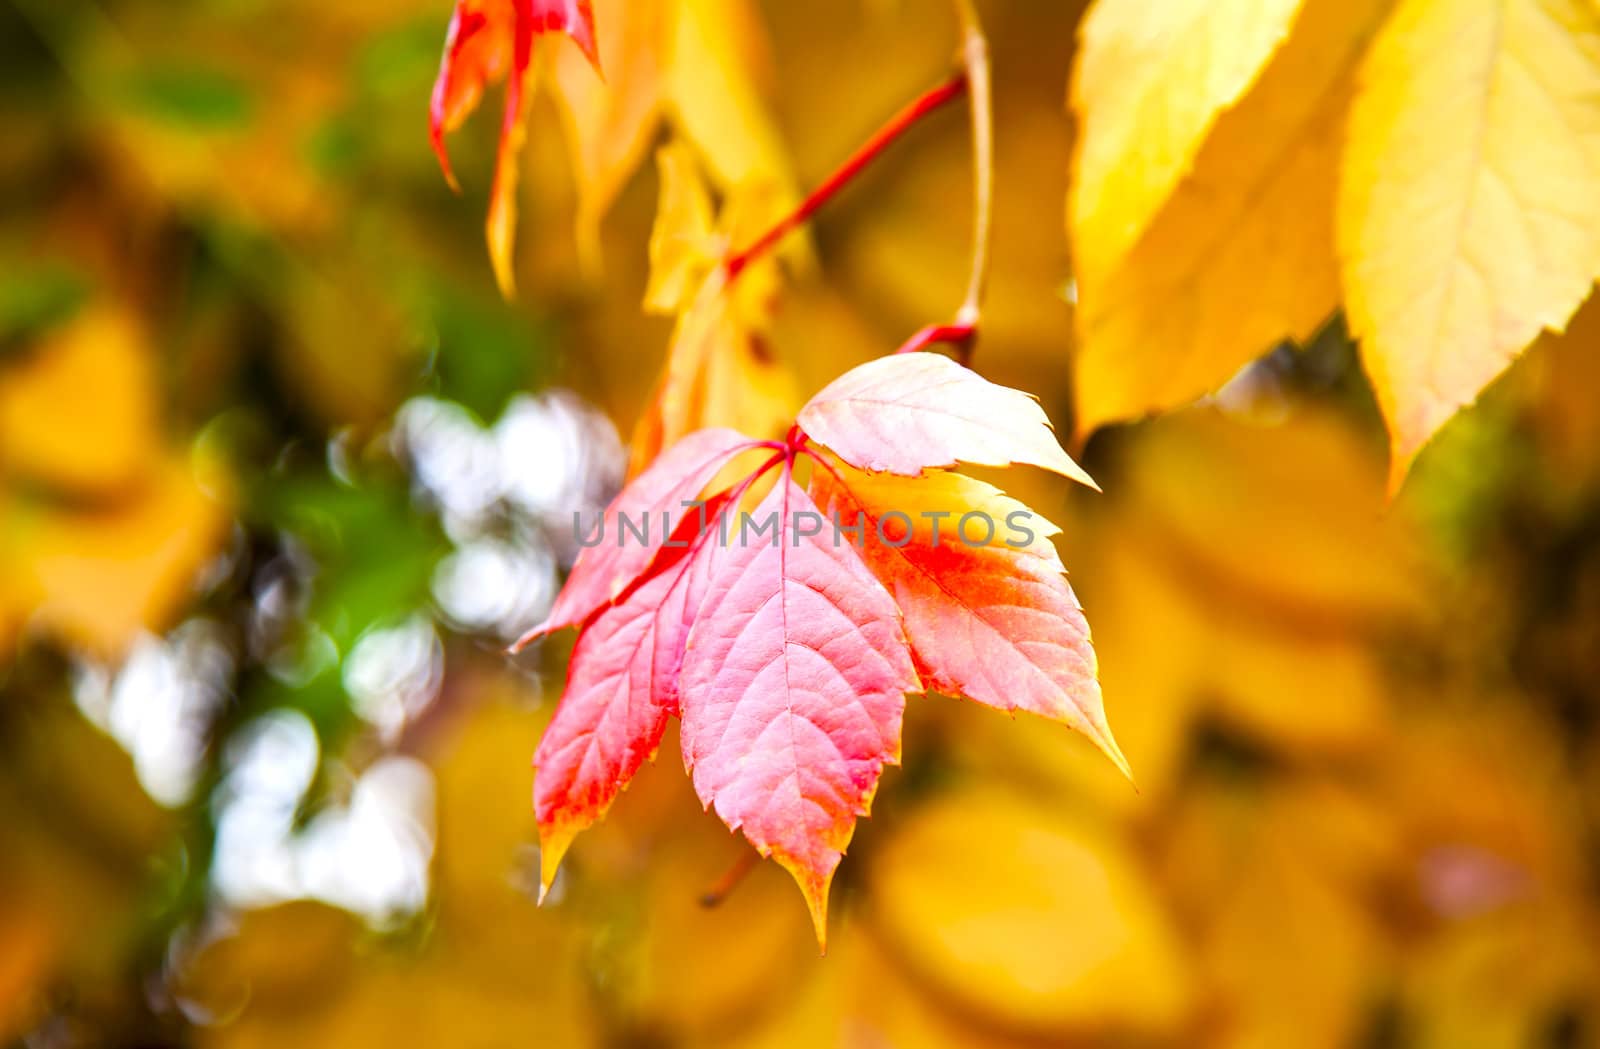 Autumn red leaа on golden leaves foliage background